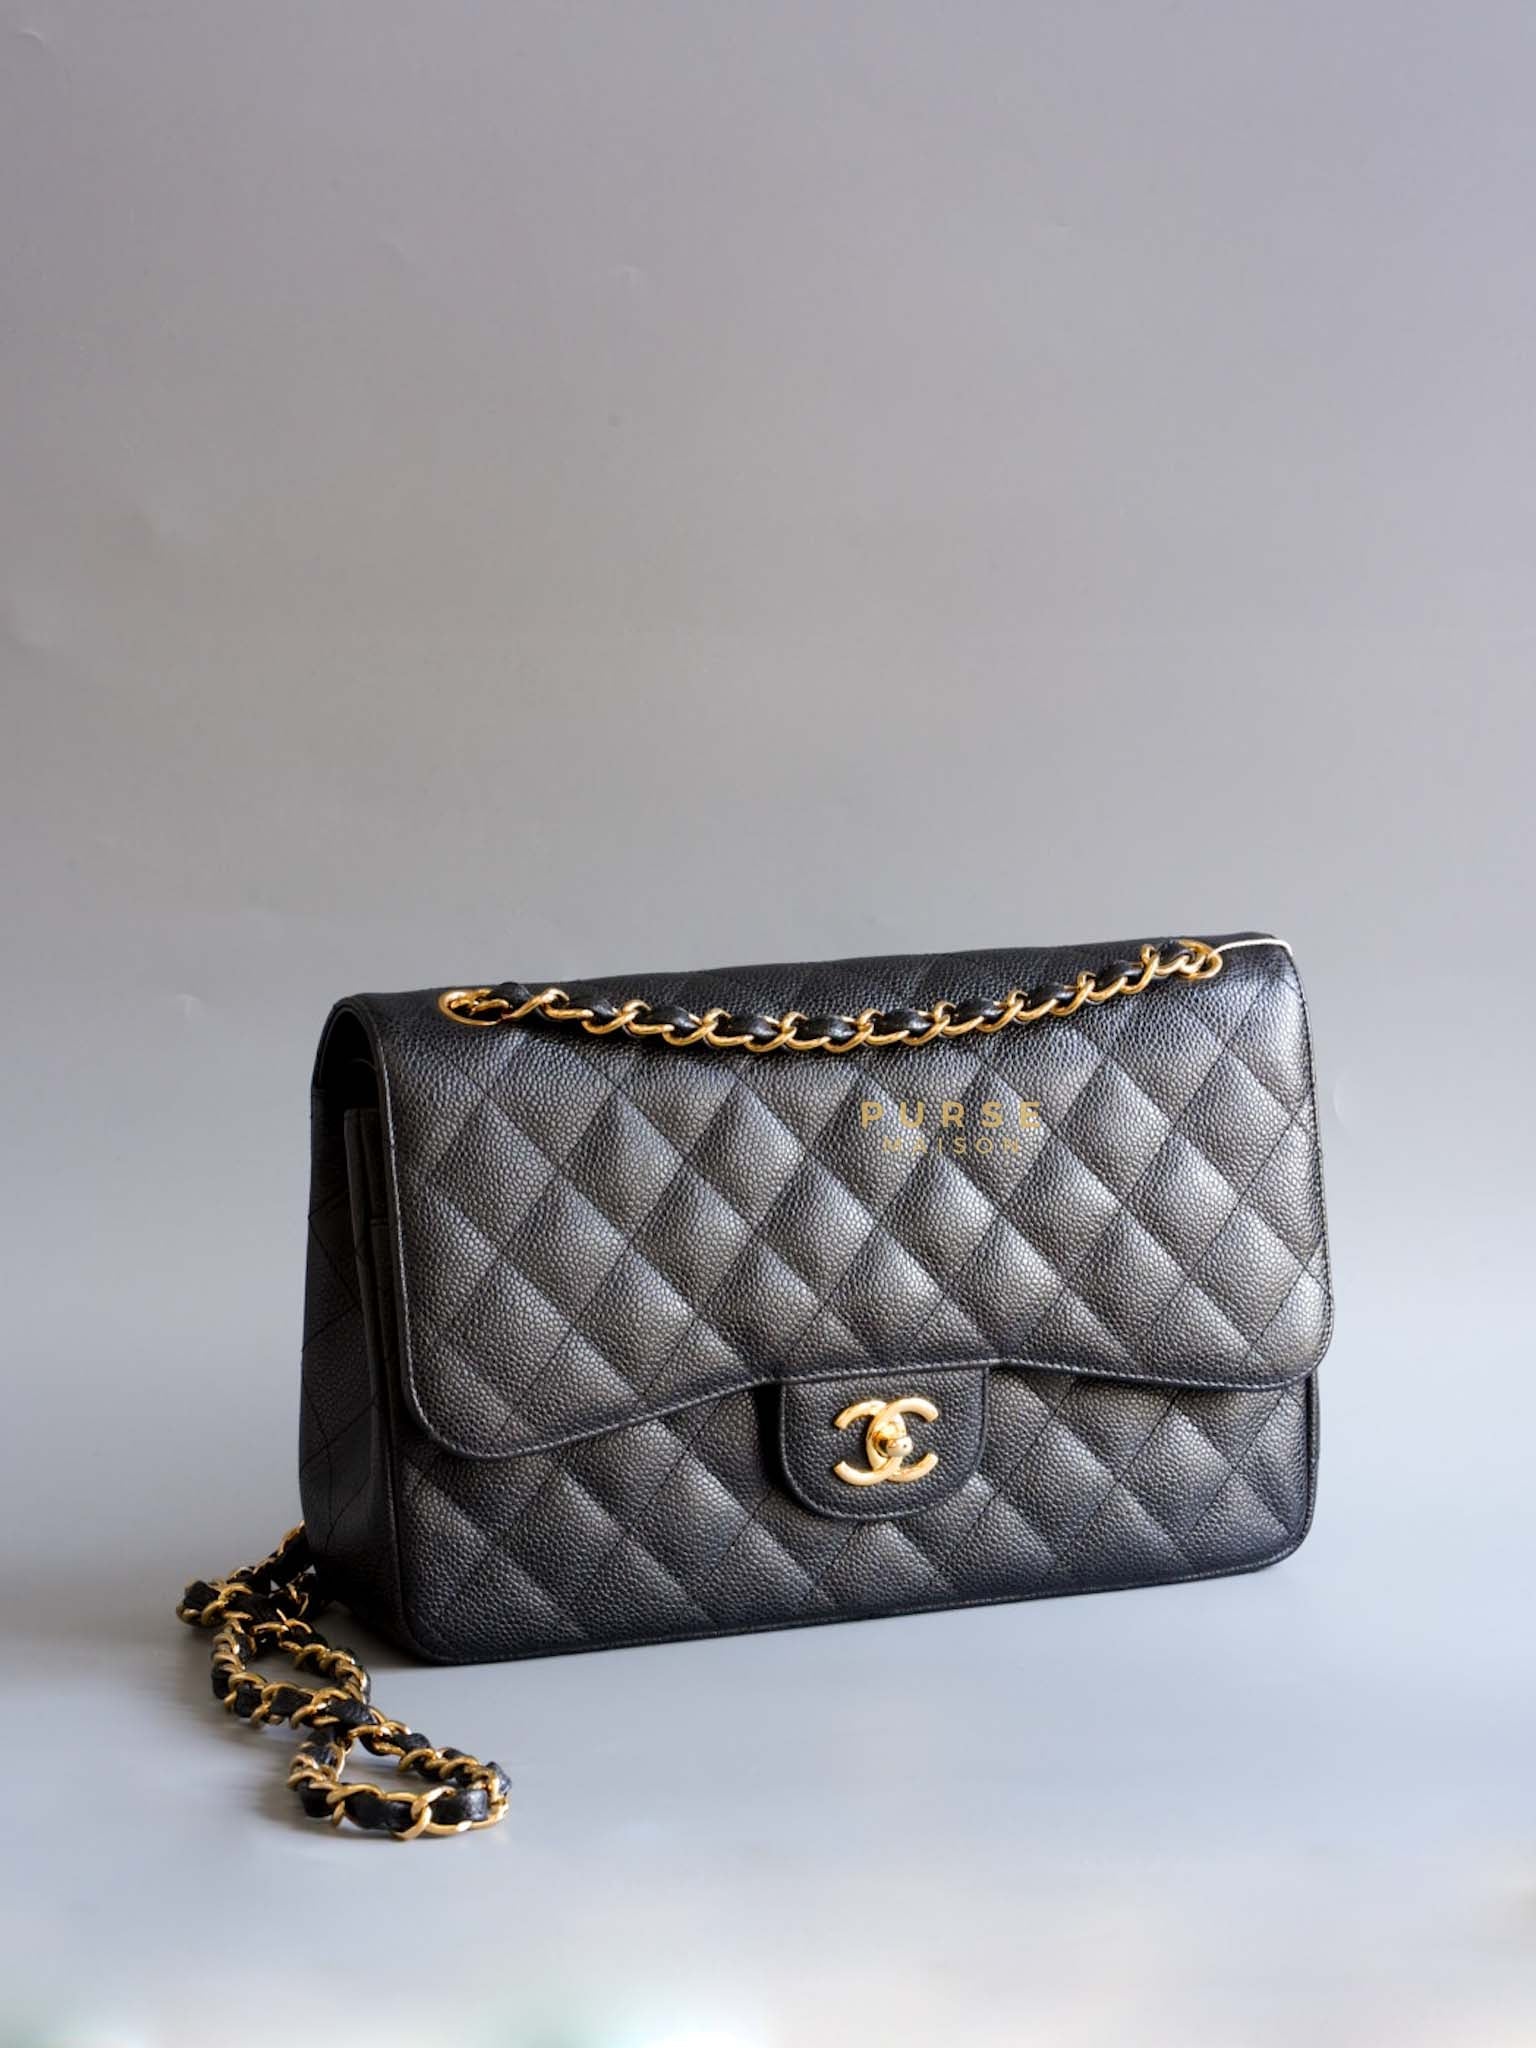 Chanel Classic Double Flap Jumbo in Black Caviar and Gold Hardware (Series 15) | Purse Maison Luxury Bags Shop